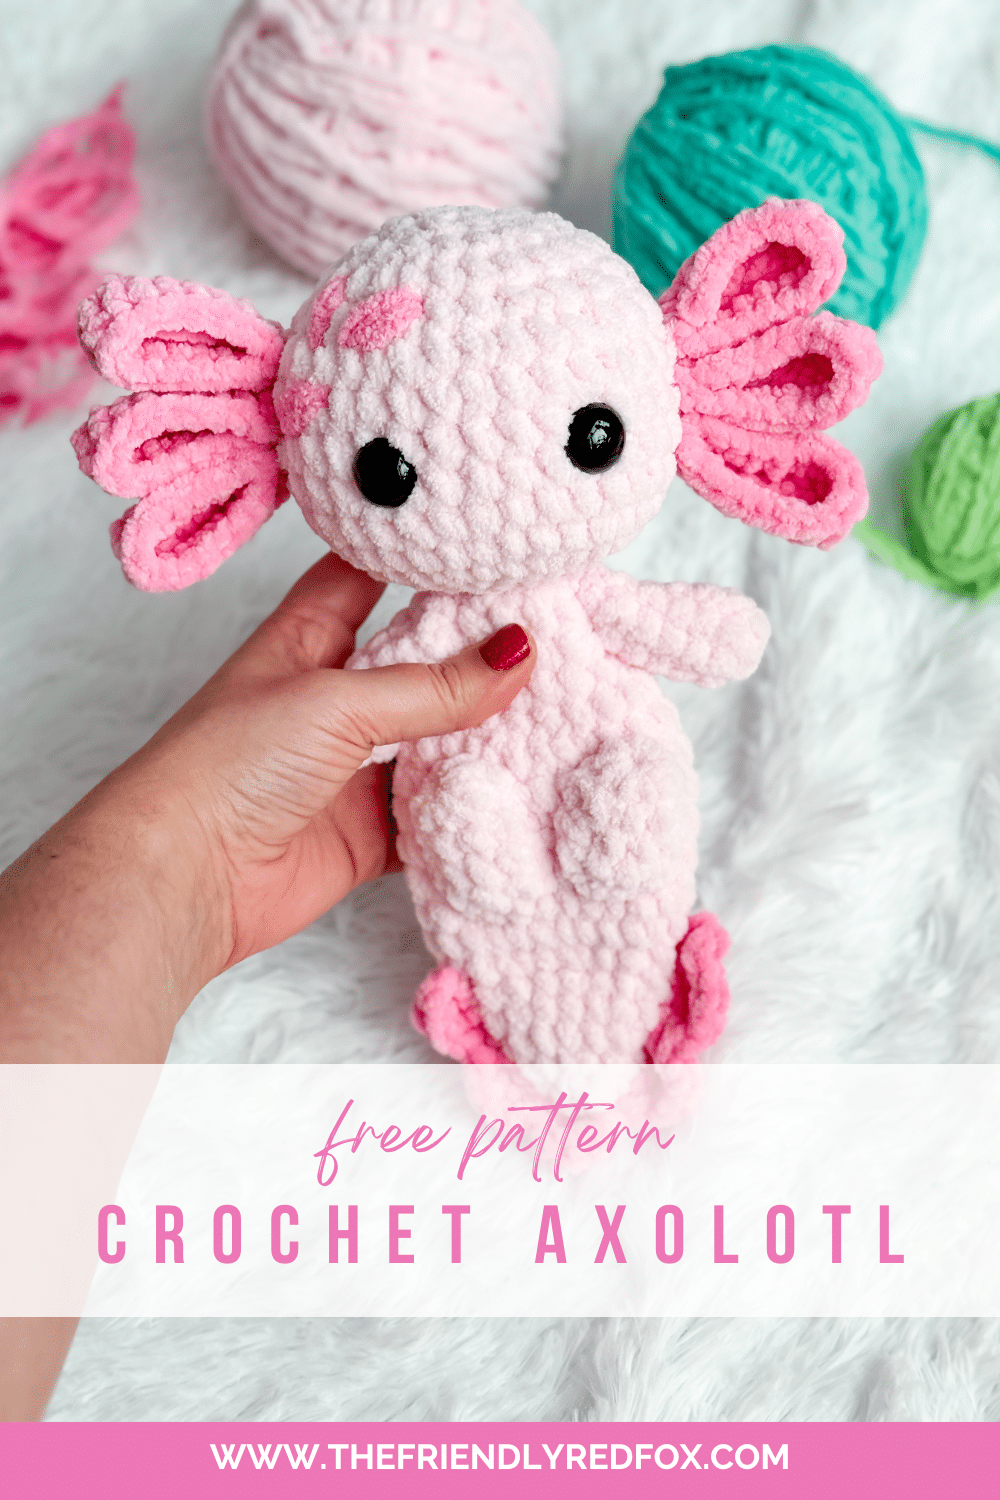 This free crochet axolotl pattern is cute and quick to make! Using blanket yarn makes this a cuddle sized amigurumi axolotl plushie, while using worsted weight yarn makes a 5 inch little backpack buddy!